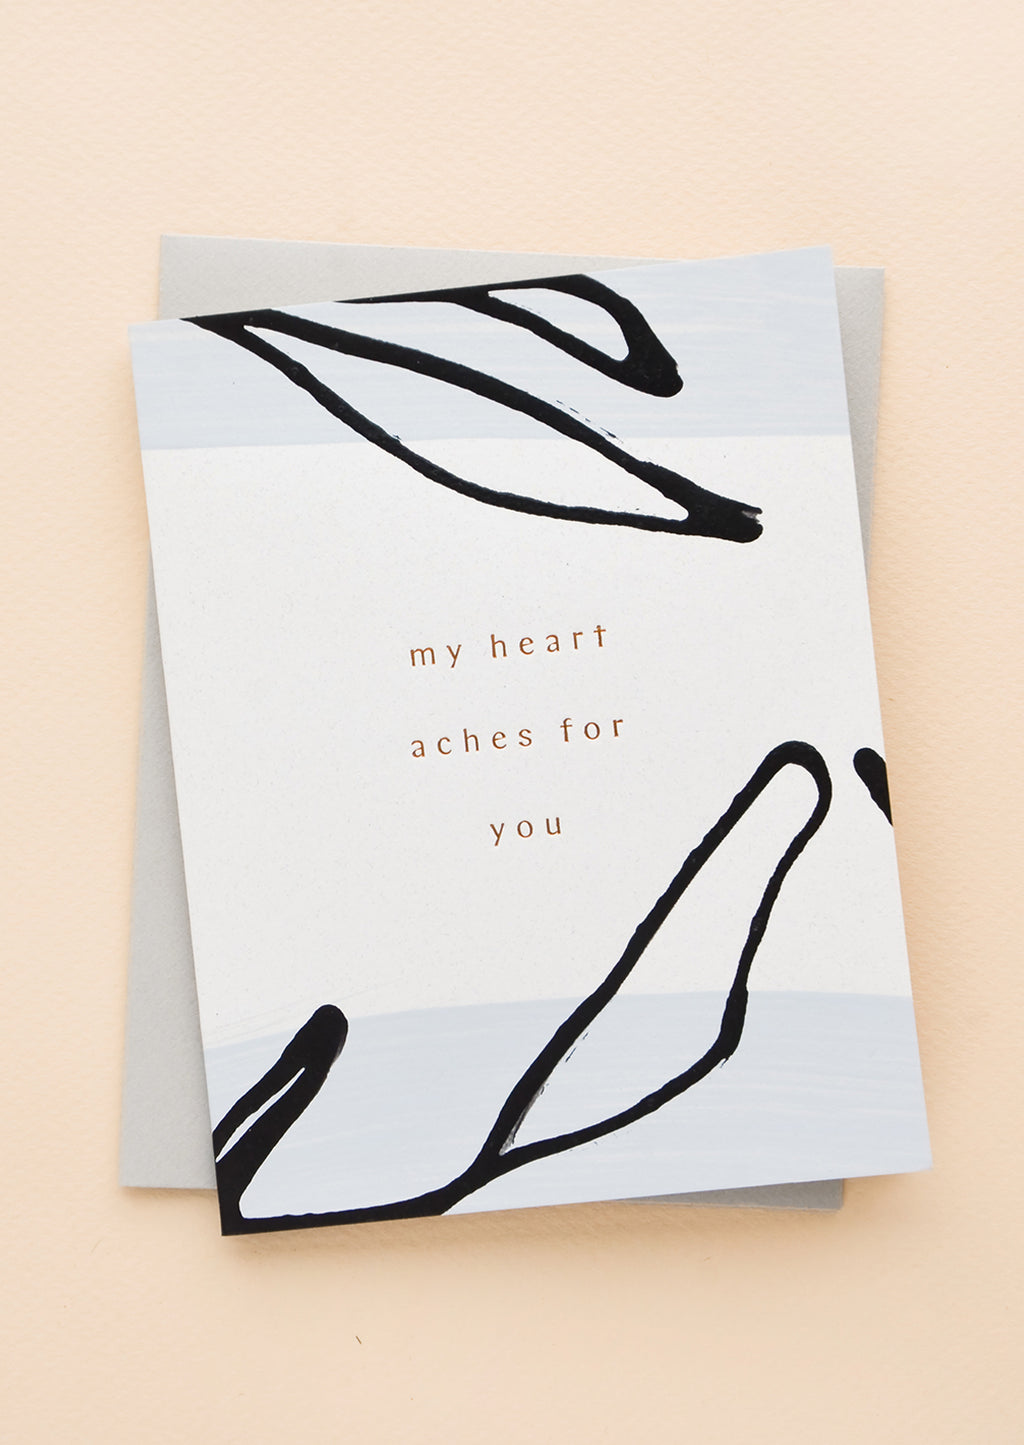 2: Hand painted greeting card with copper foil text reading "My Heart Aches For You", with grey envelope.